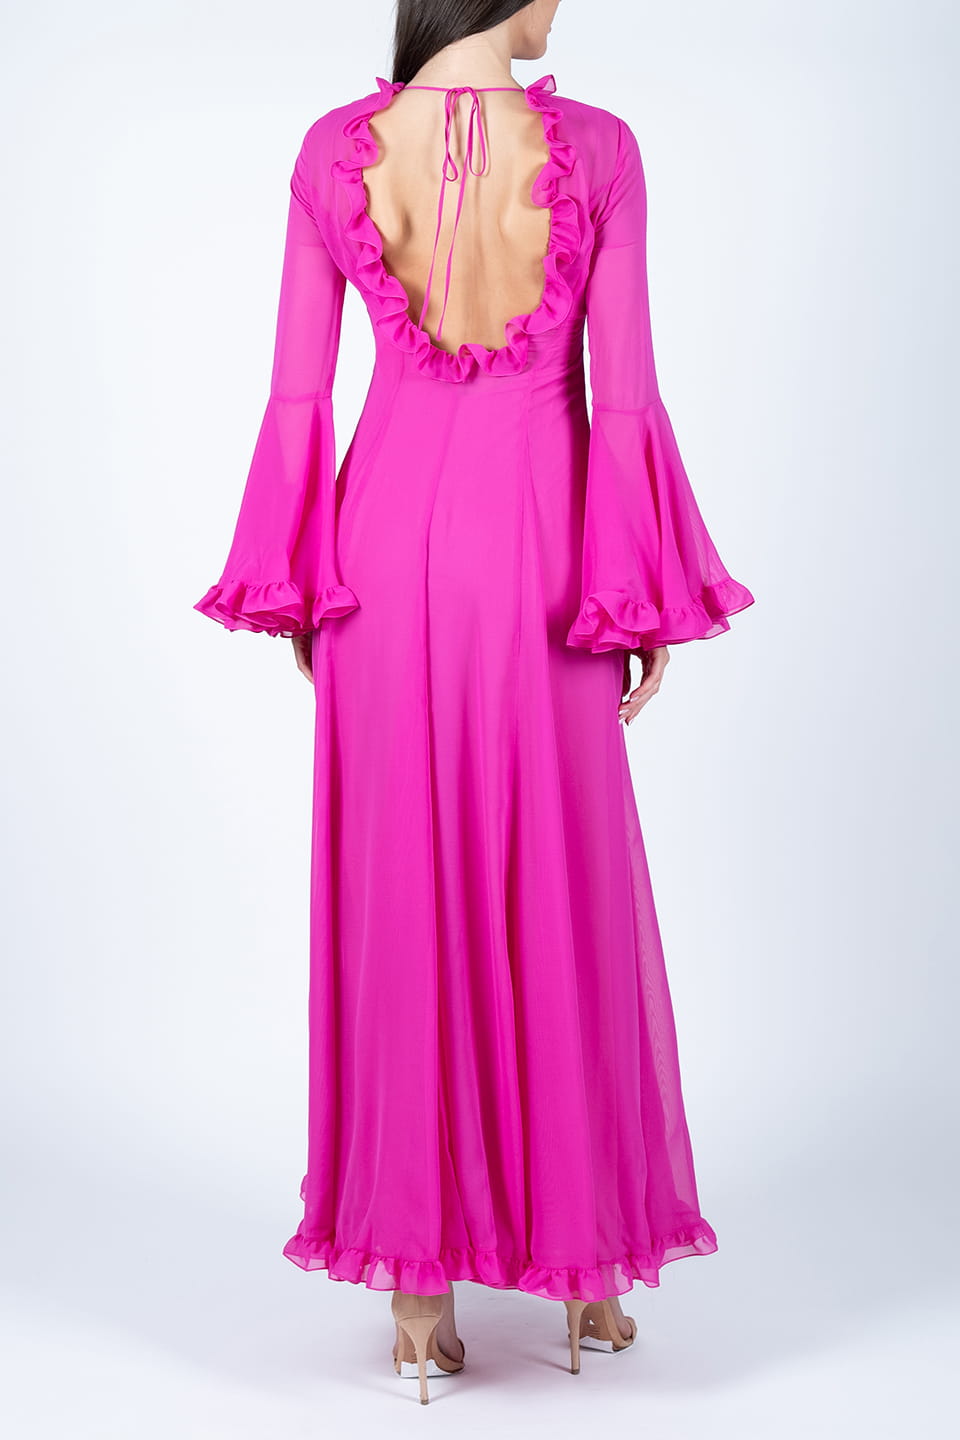 Thumbnail for Product gallery 4, Georgette Pink Long Dress